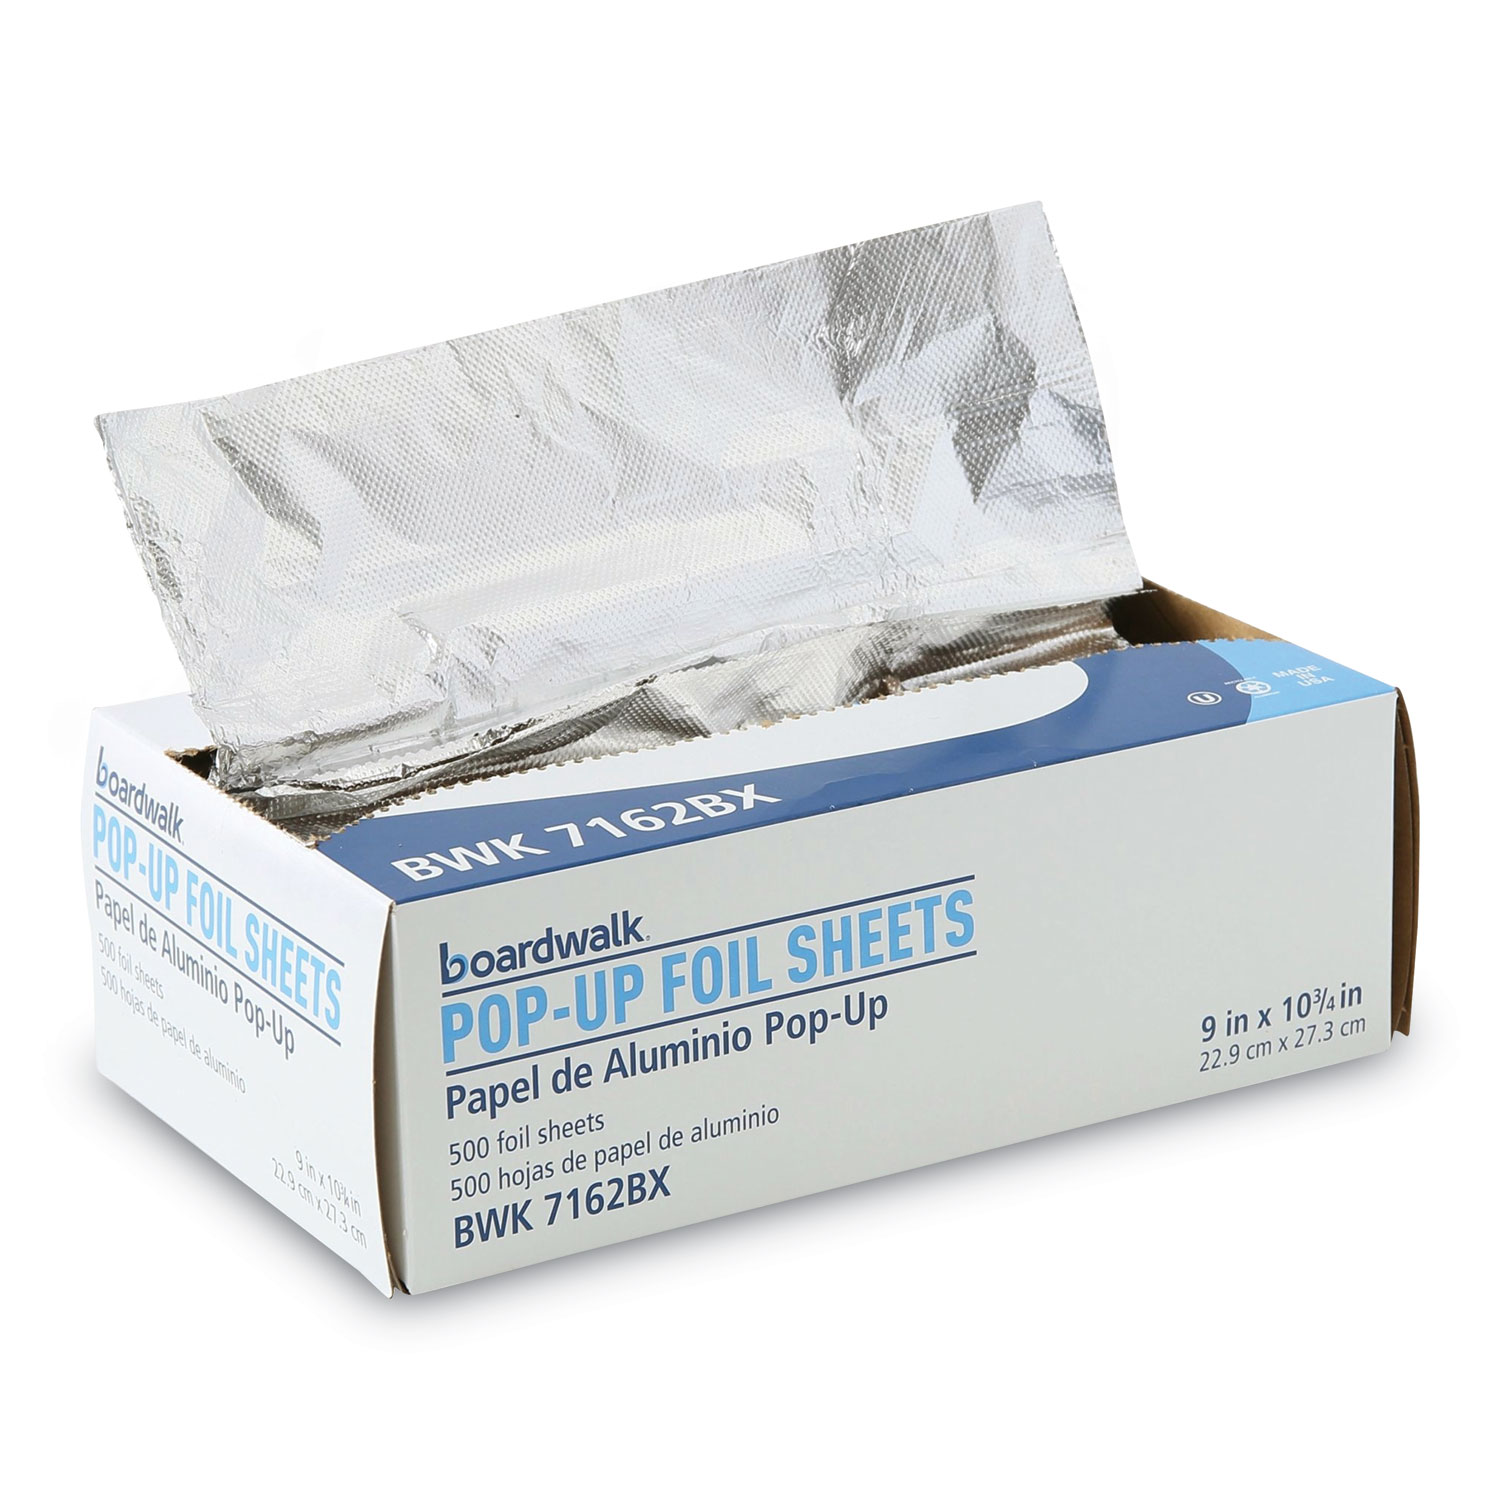 First Street Aluminum Foil Sheets 12x10.75 inch (500 count)